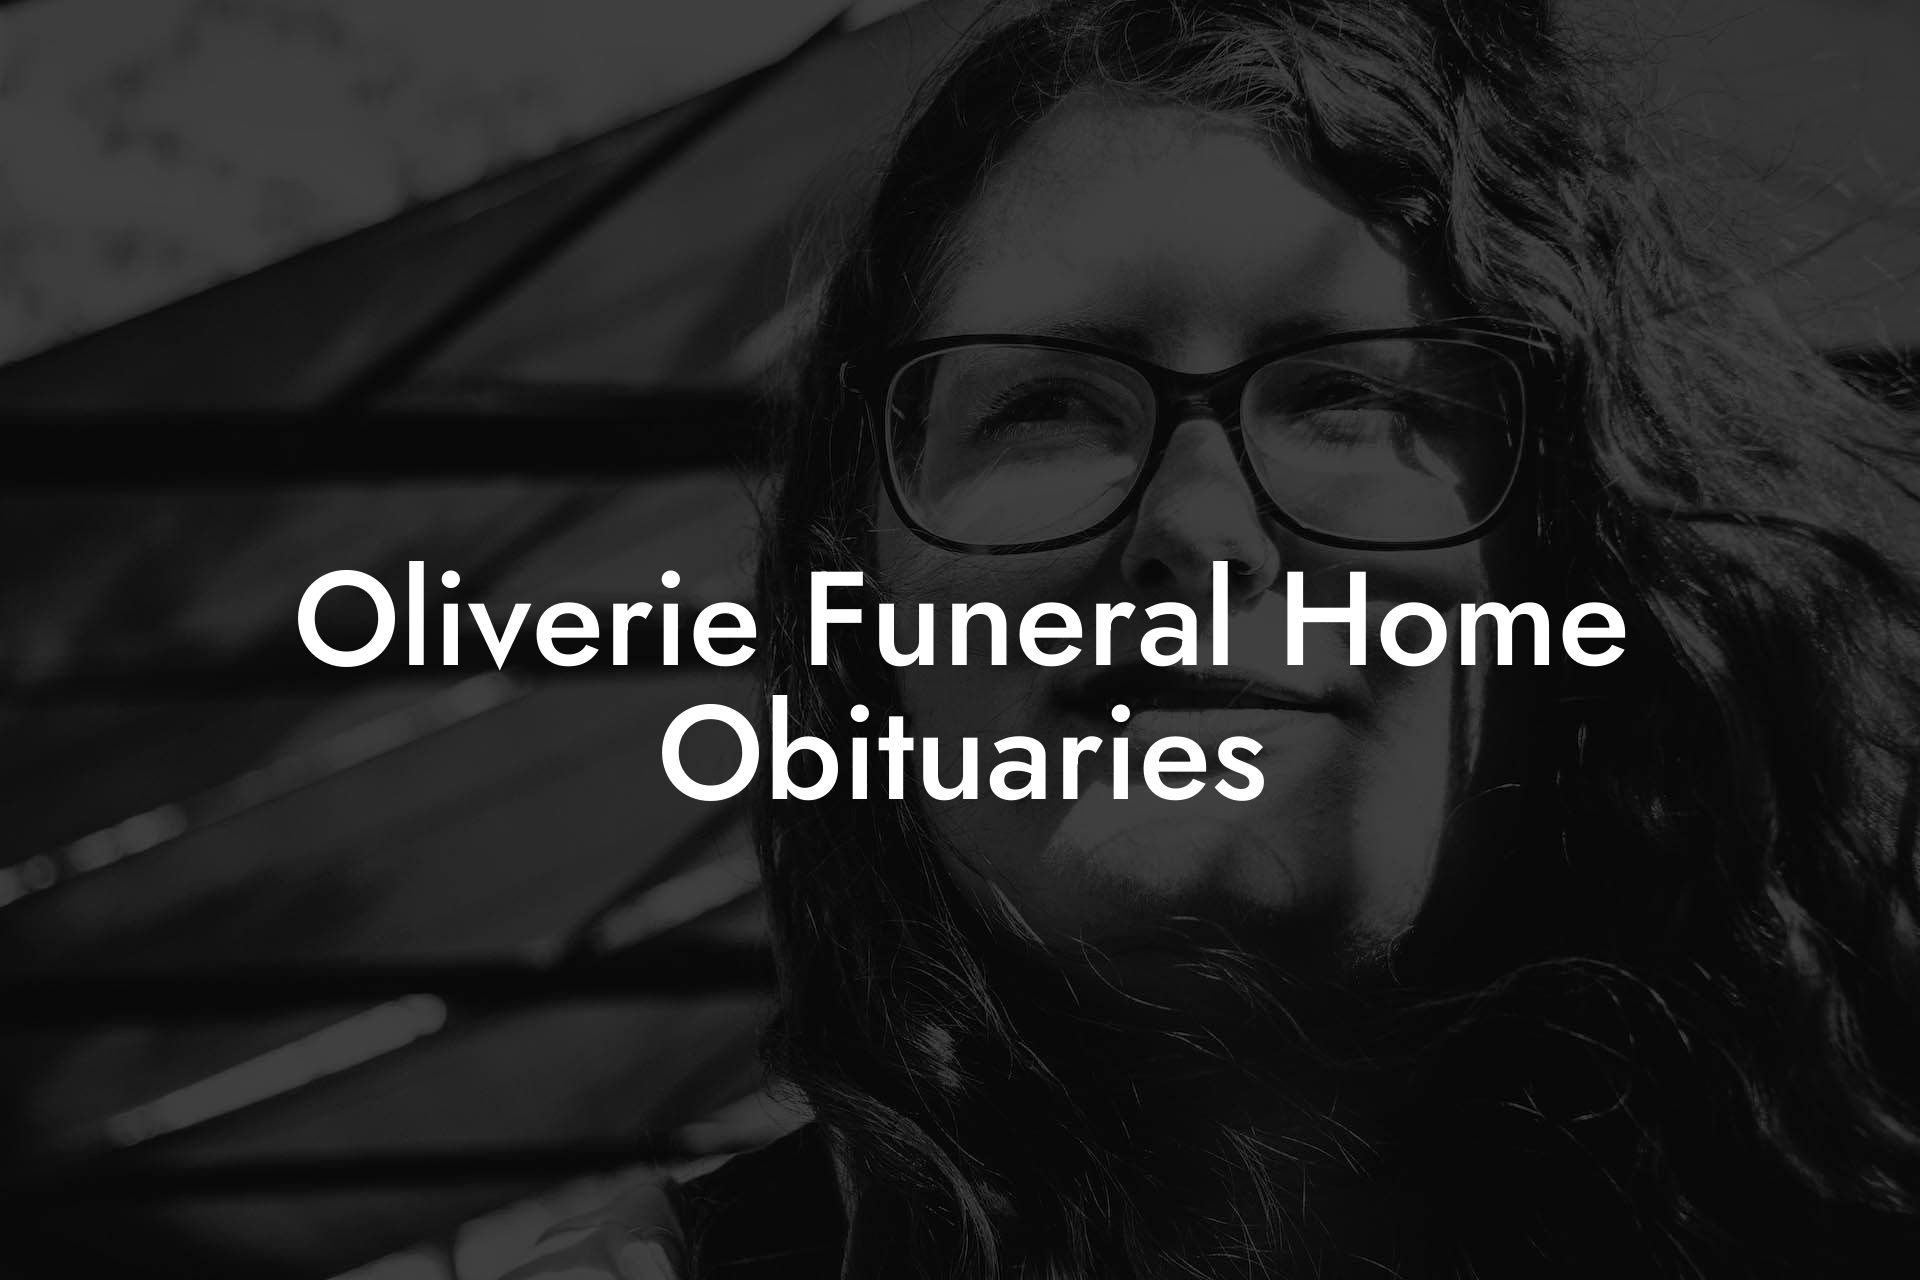 Oliverie Funeral Home Obituaries